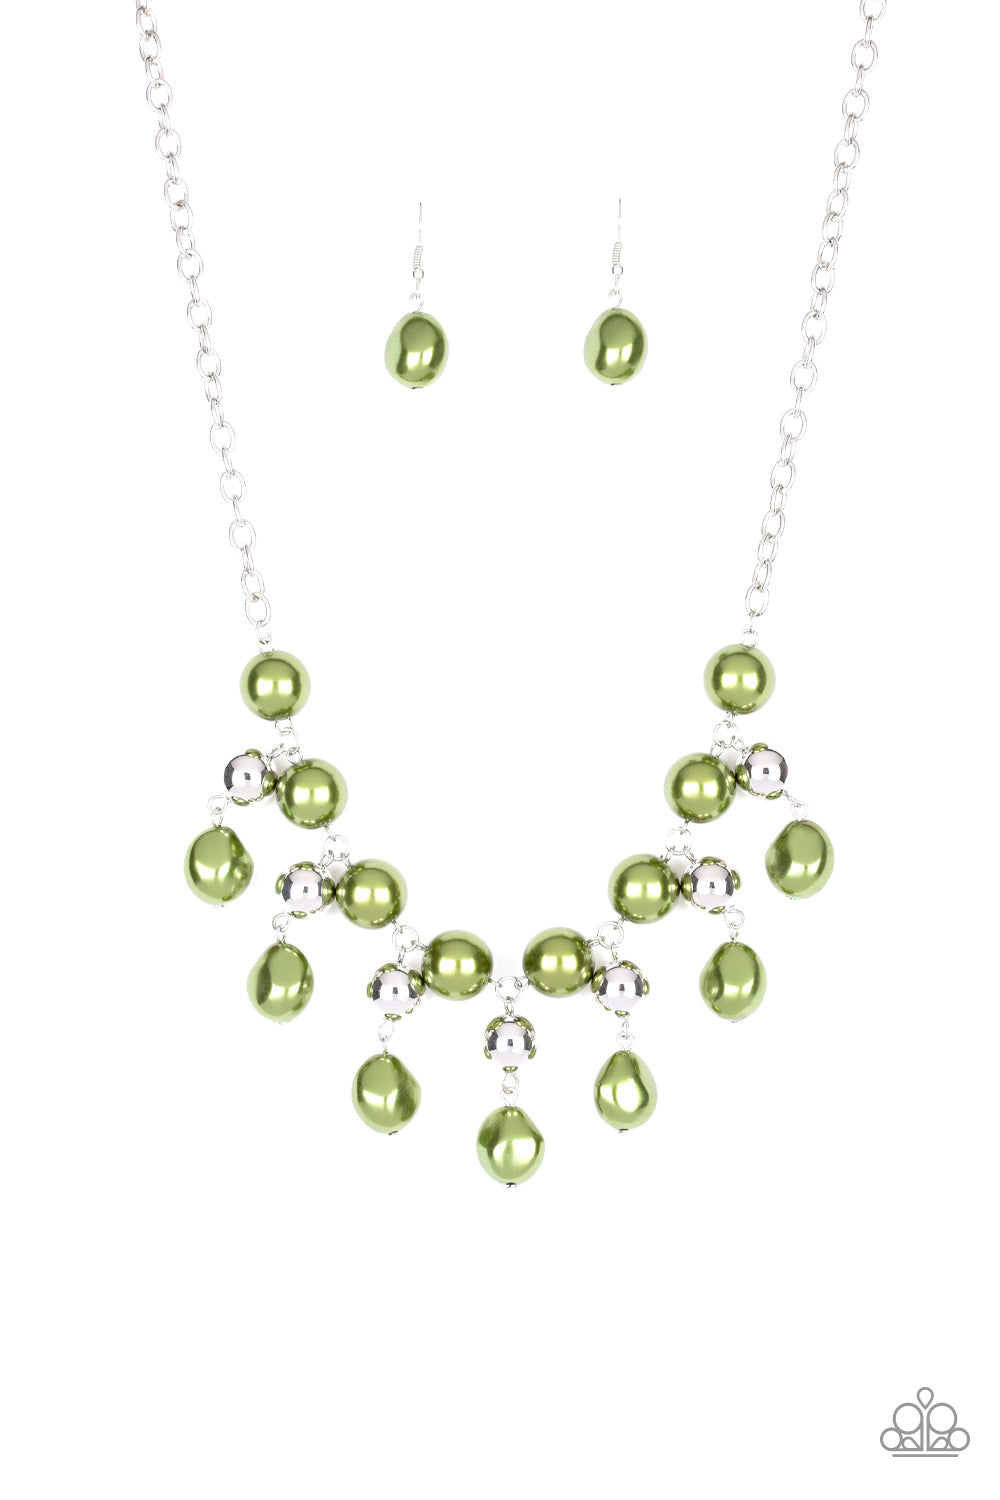 Queen Of The Gala Green Paparazzi Necklaces Cashmere Pink Jewels - Cashmere Pink Jewels & Accessories, Cashmere Pink Jewels & Accessories - Paparazzi